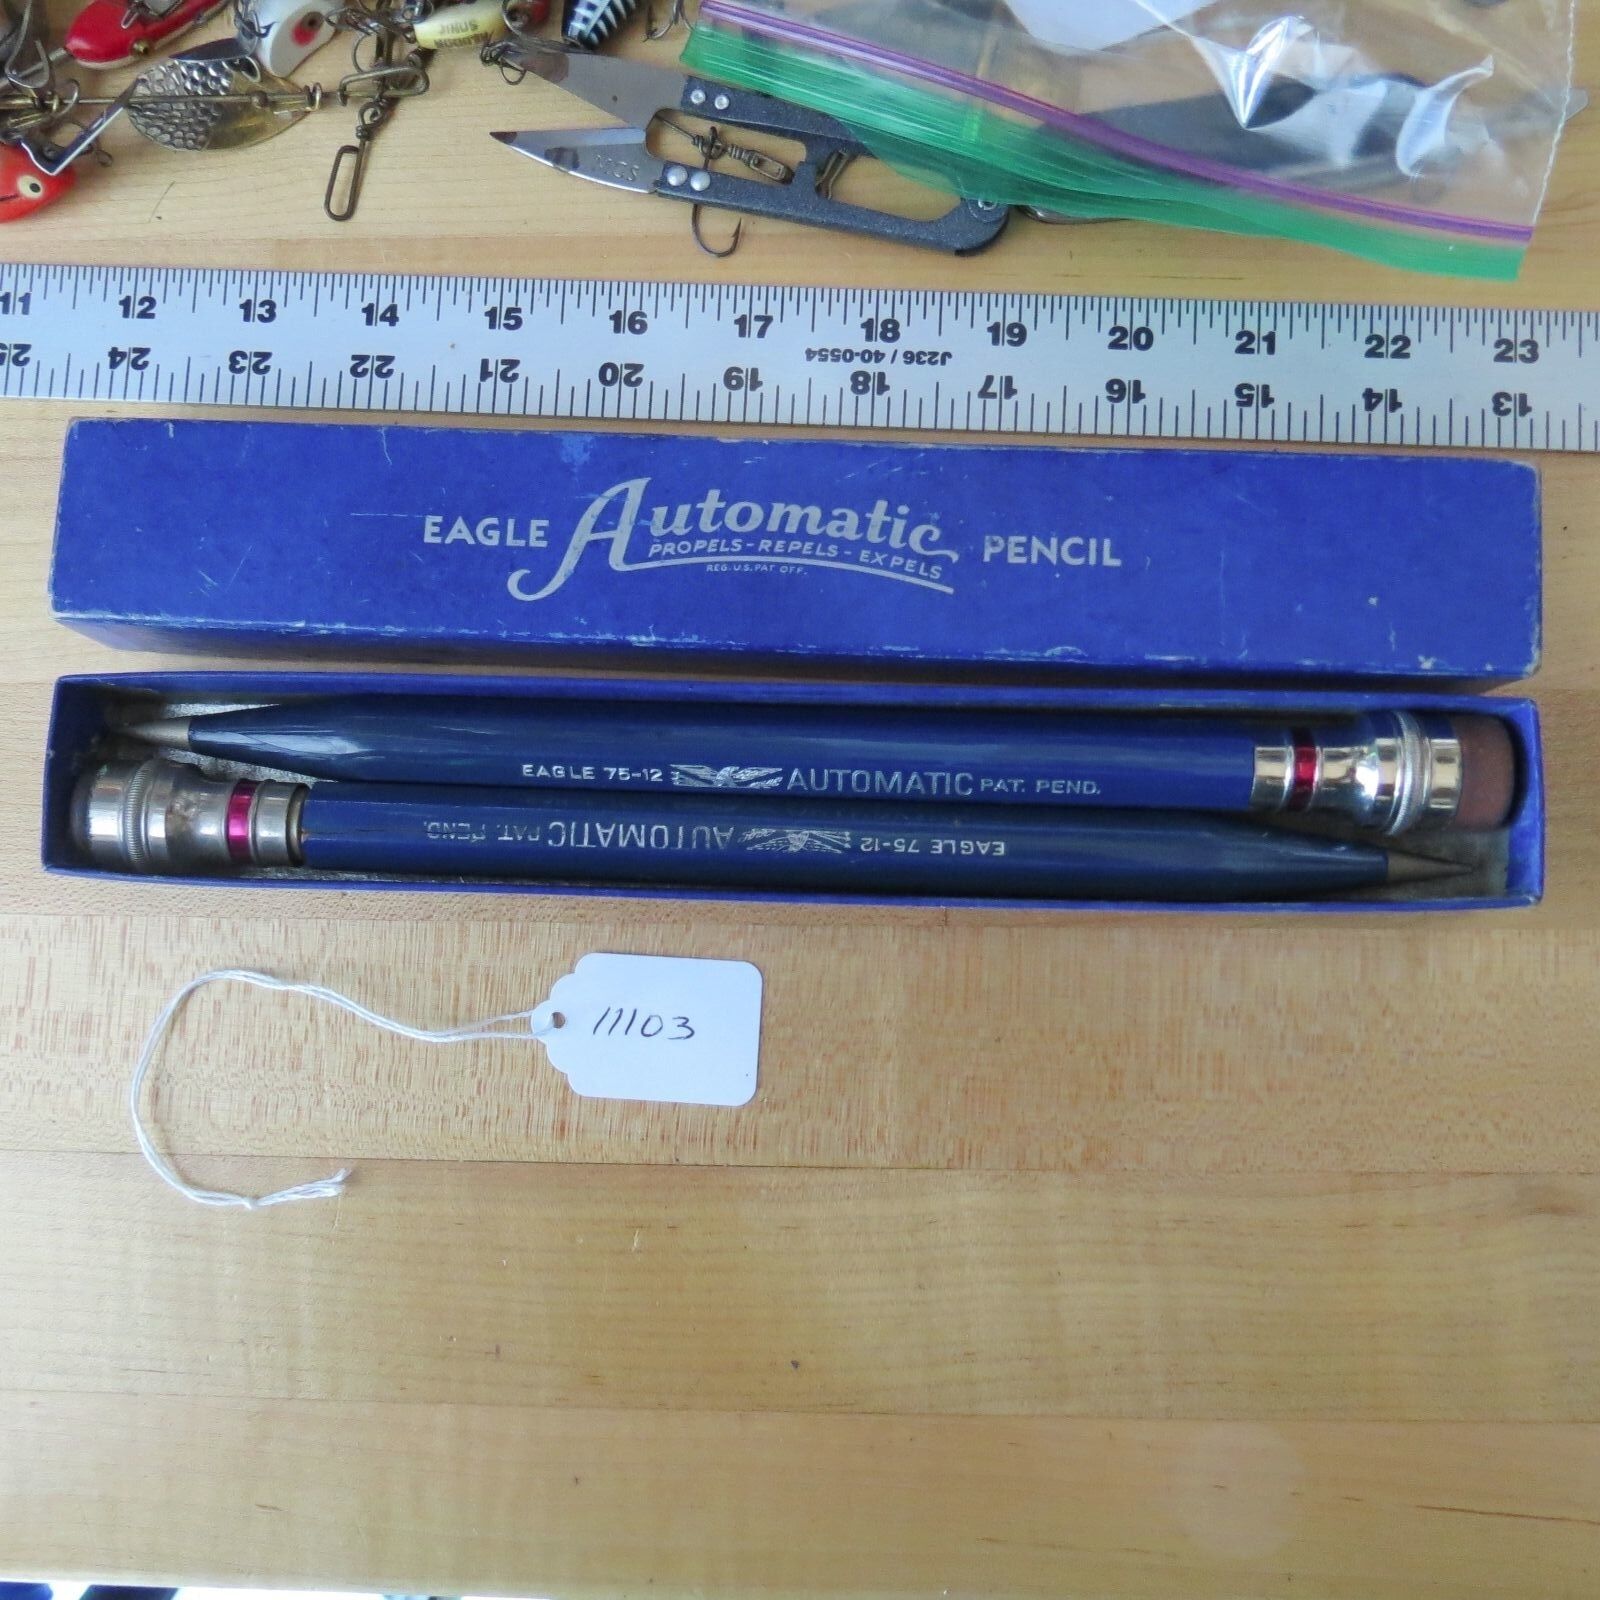 Vintage Eagle Automatic Pencils (only one works) (lot#11103)